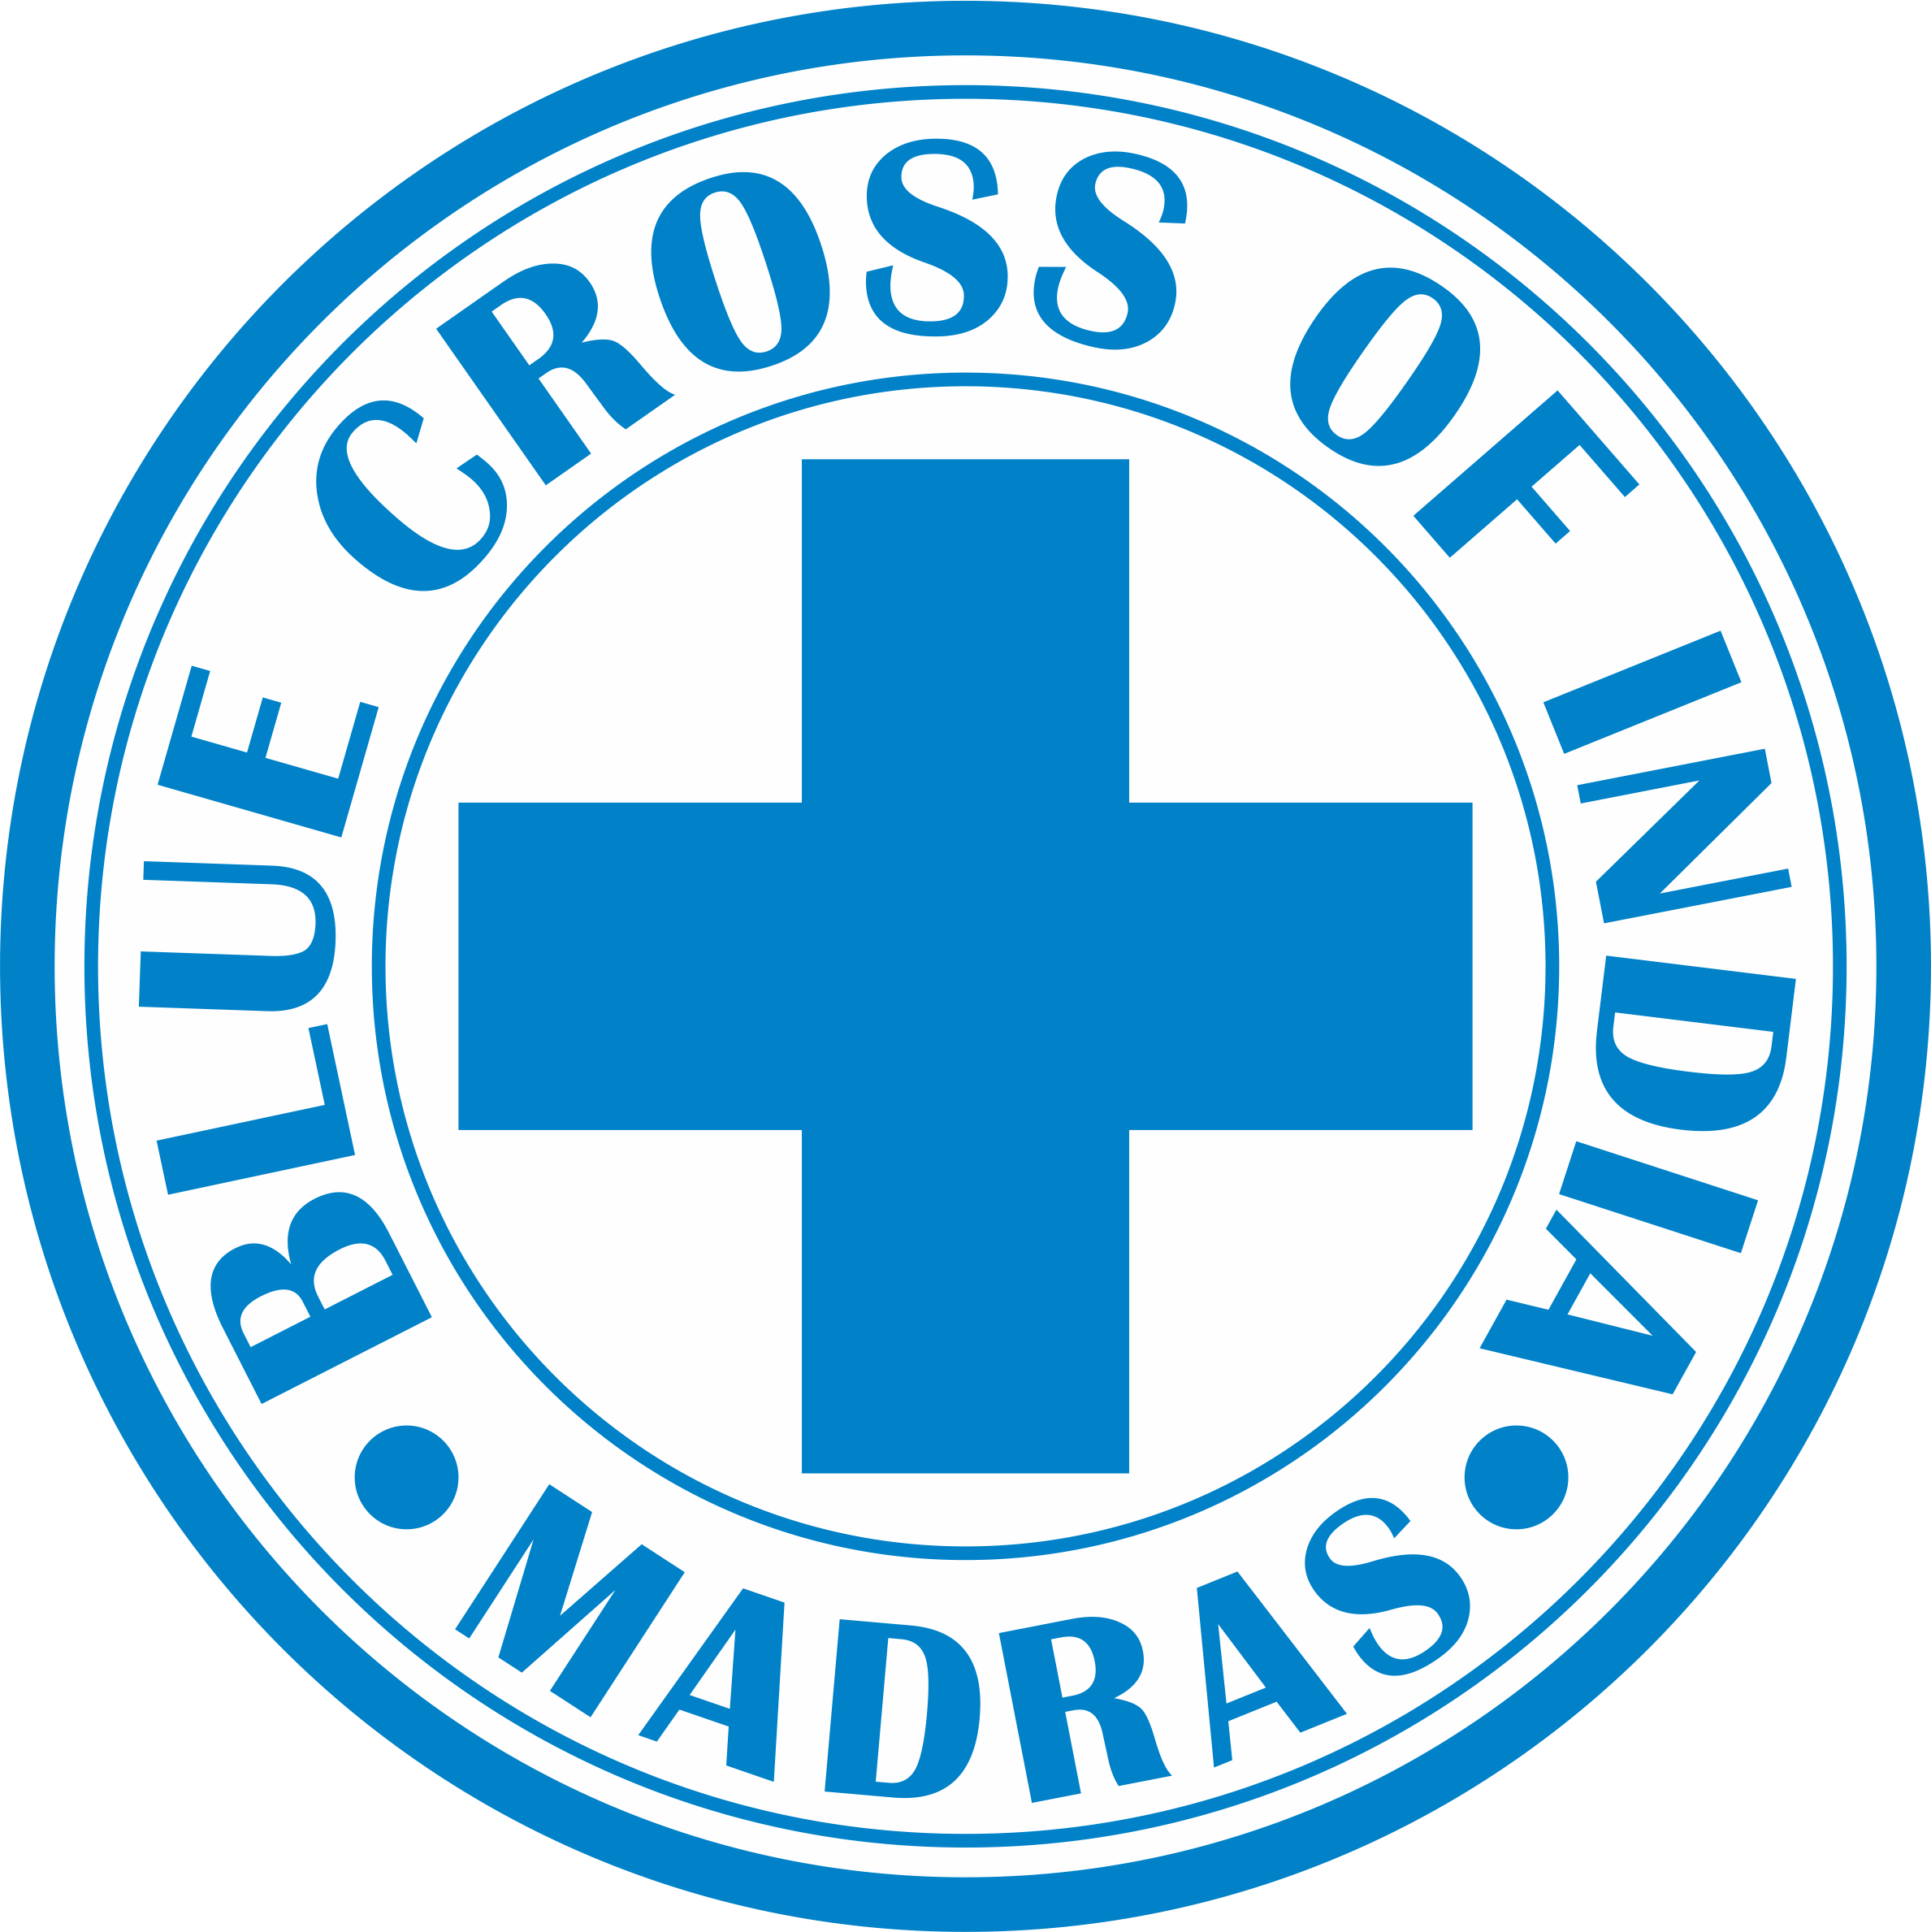 Watch with Blue Cross Logo - Rescue of animals by Blue Cross of India in Chennai - Watch video